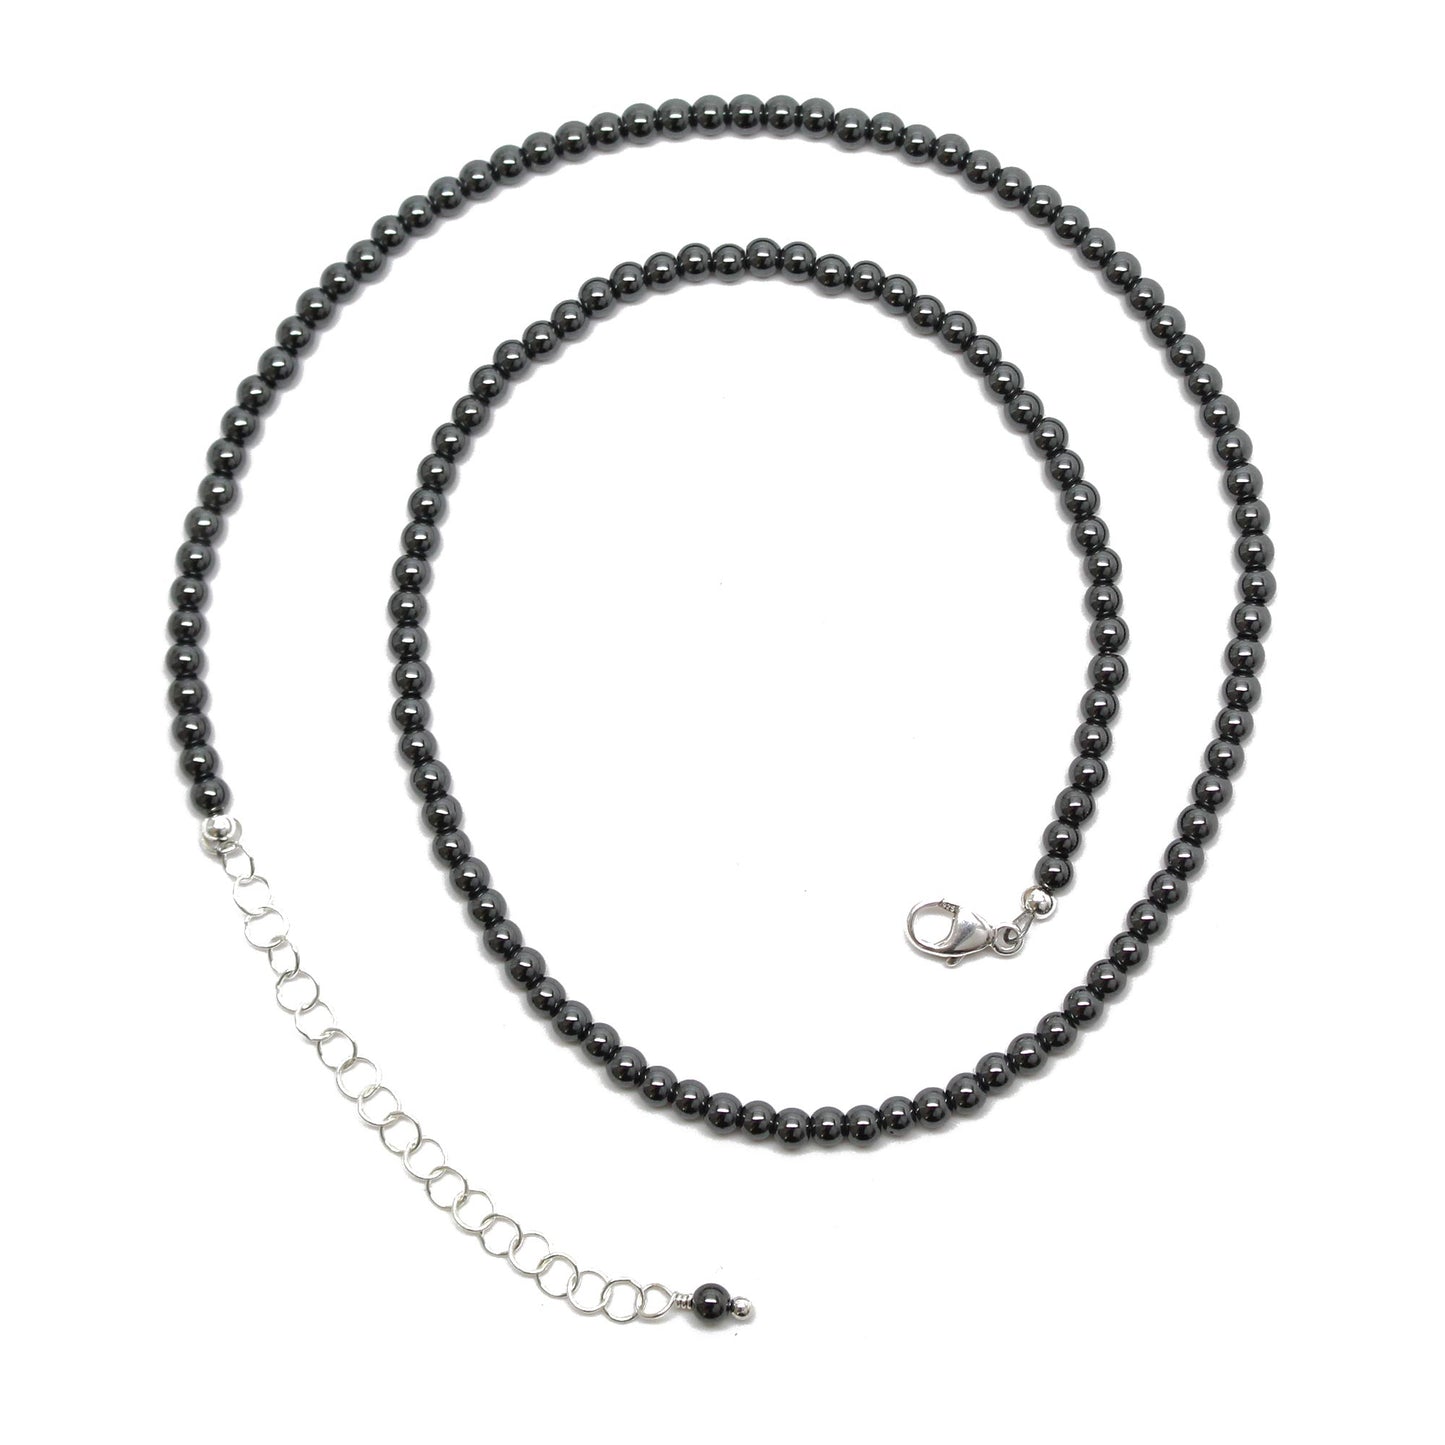  KESYOO beads necklace magnet necklaces black choker sweater  Pendant antique necklace sweater necklace men magnetic necklace health  necklace women magnetic bead necklace vintage Hematite: Clothing, Shoes &  Jewelry